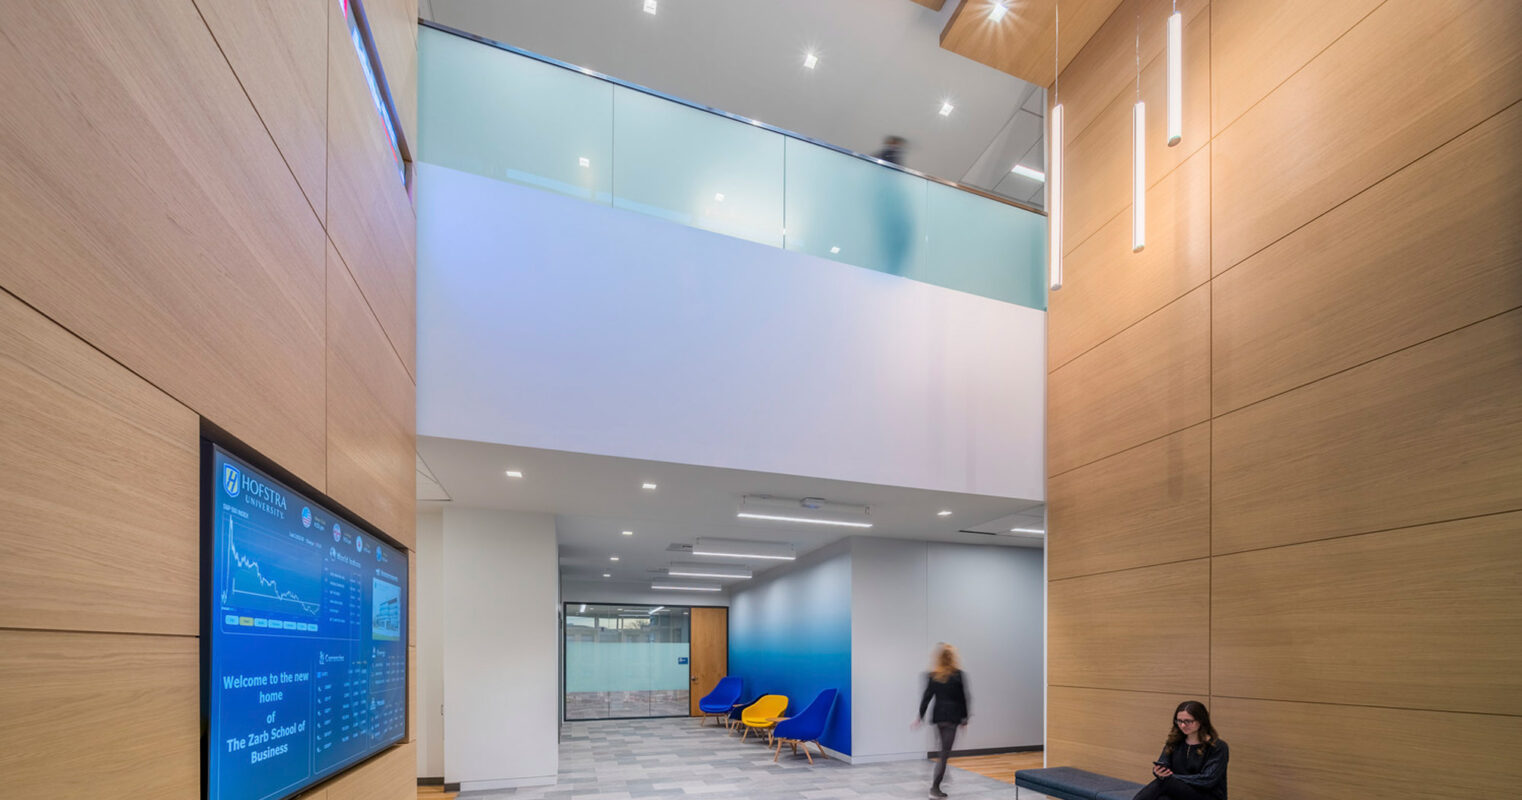 Modern office lobby featuring a warm wood-paneled wall, geometrically patterned floor, sleek hanging lights, and a digital information display. The space is illuminated by natural light from clerestory windows, enhancing the open-plan design with a blue accent chair adding a pop of color.